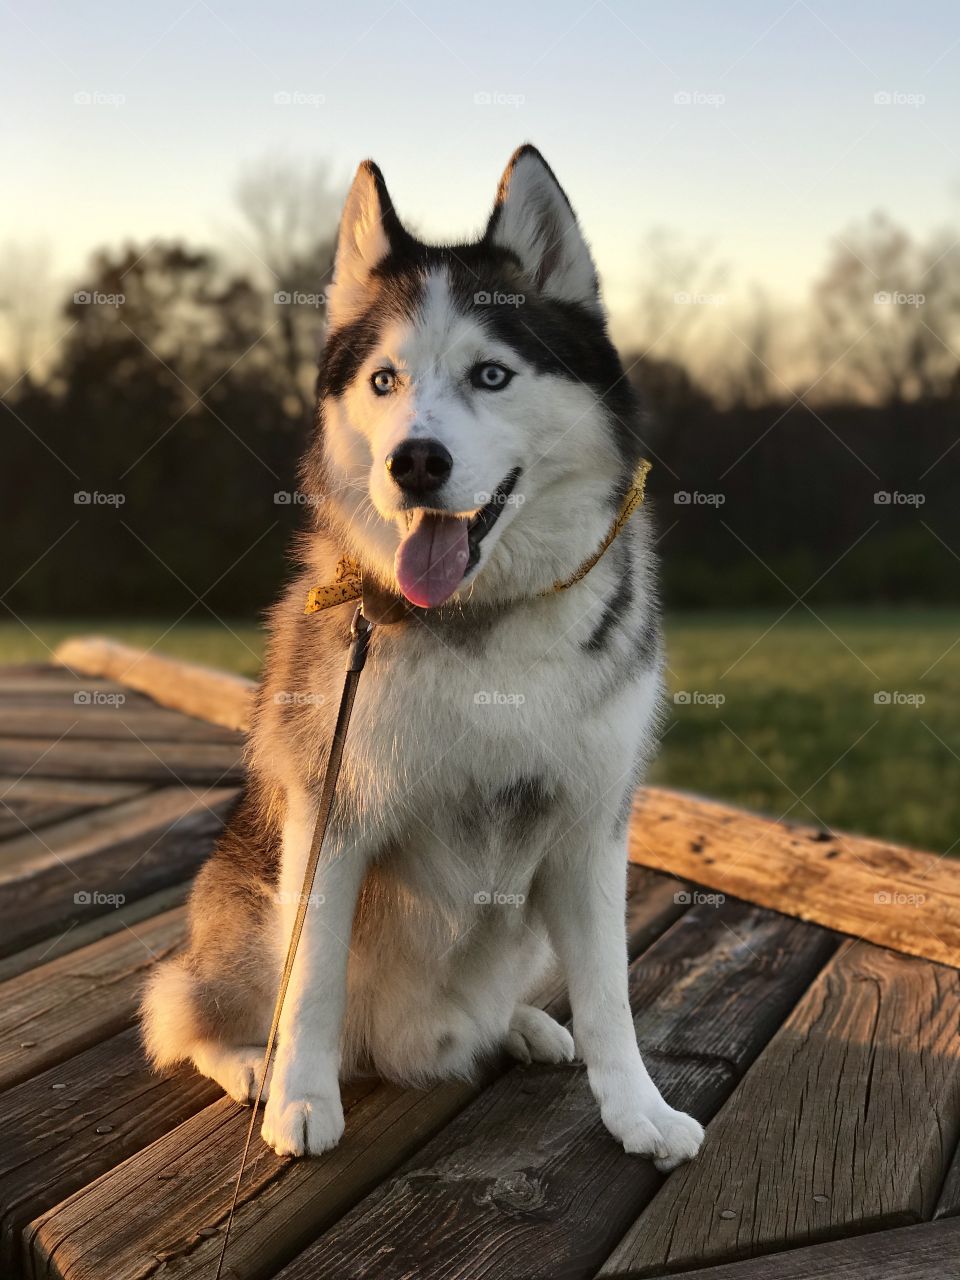 Husky smiling in the sunset in an open field on a wooden deck